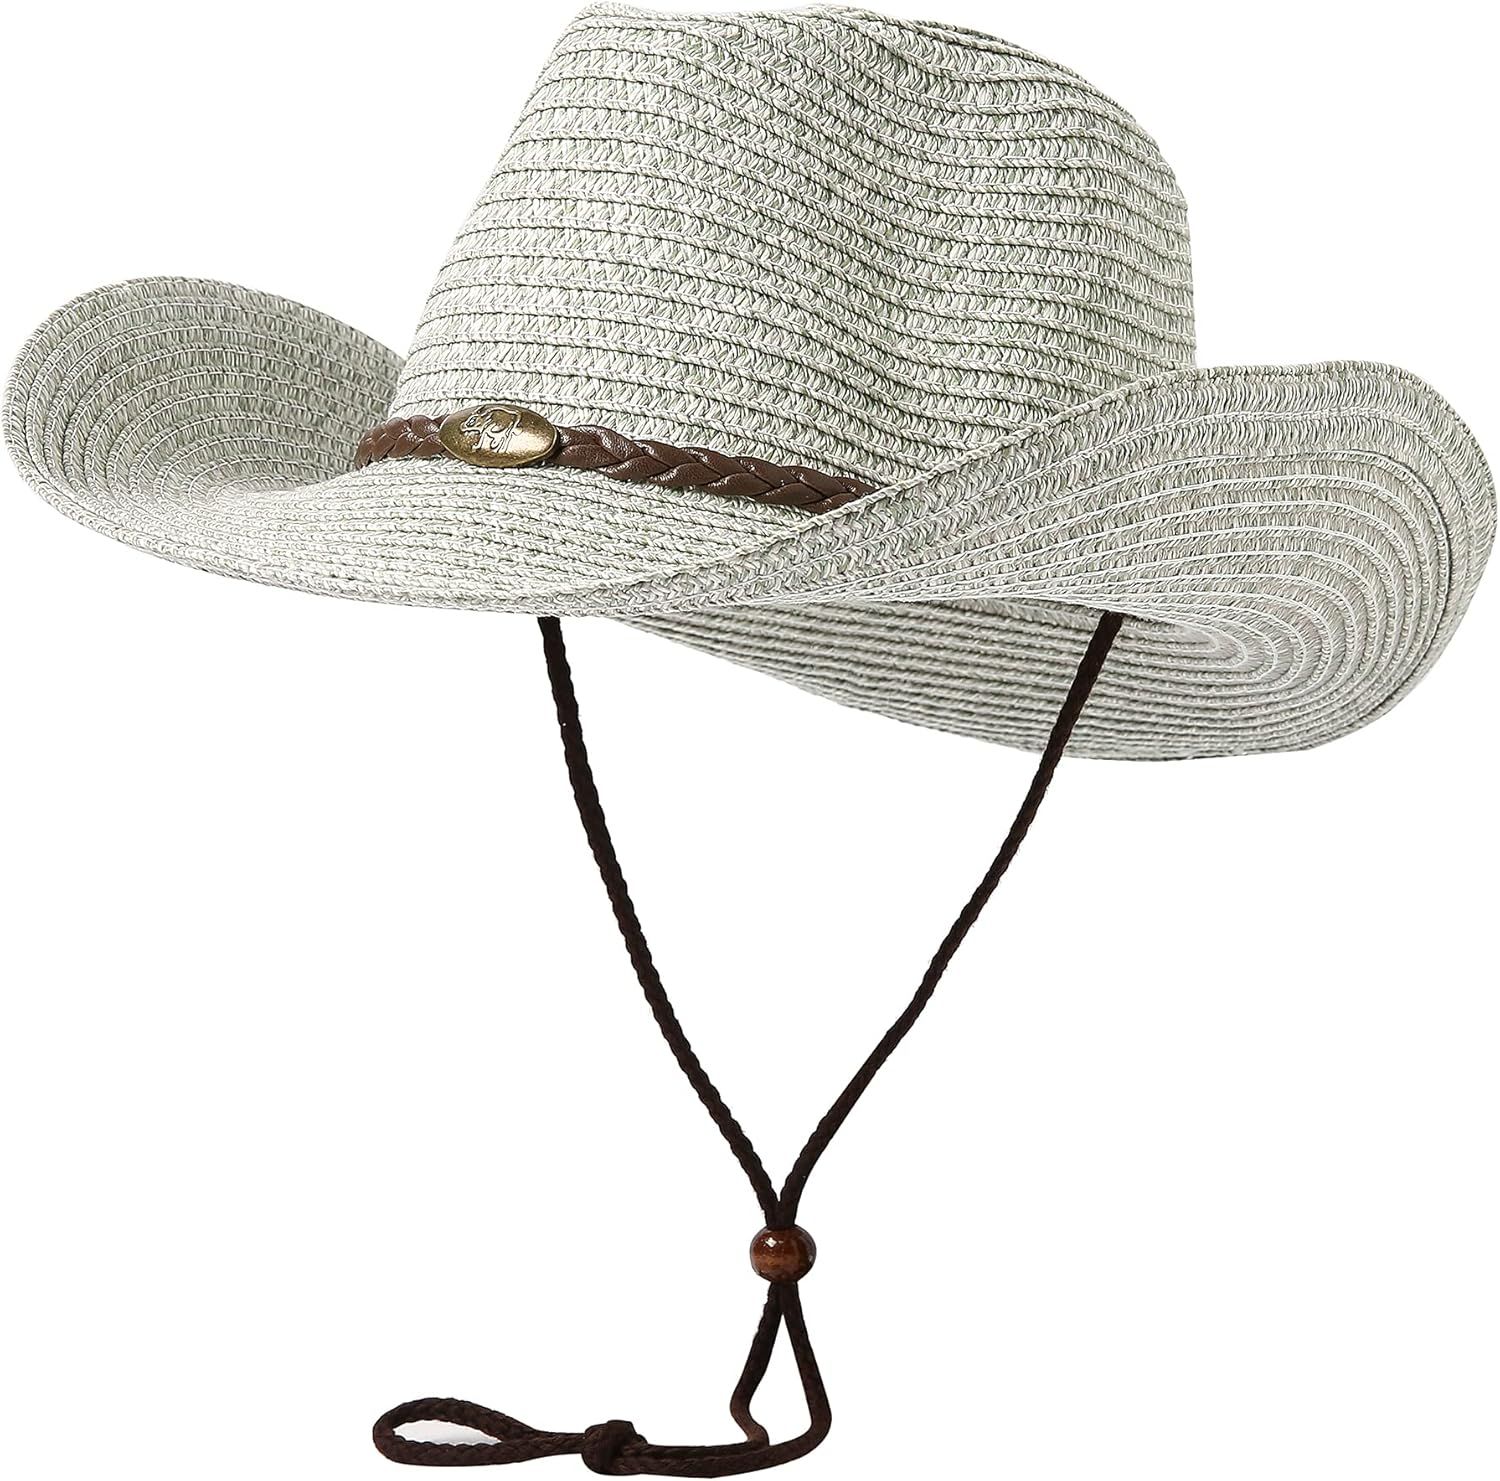 Lanzom Womens Straw Beach Sun Hat Packable Summer Cowboy Straw Hats with Wind Lanyard | Amazon (US)